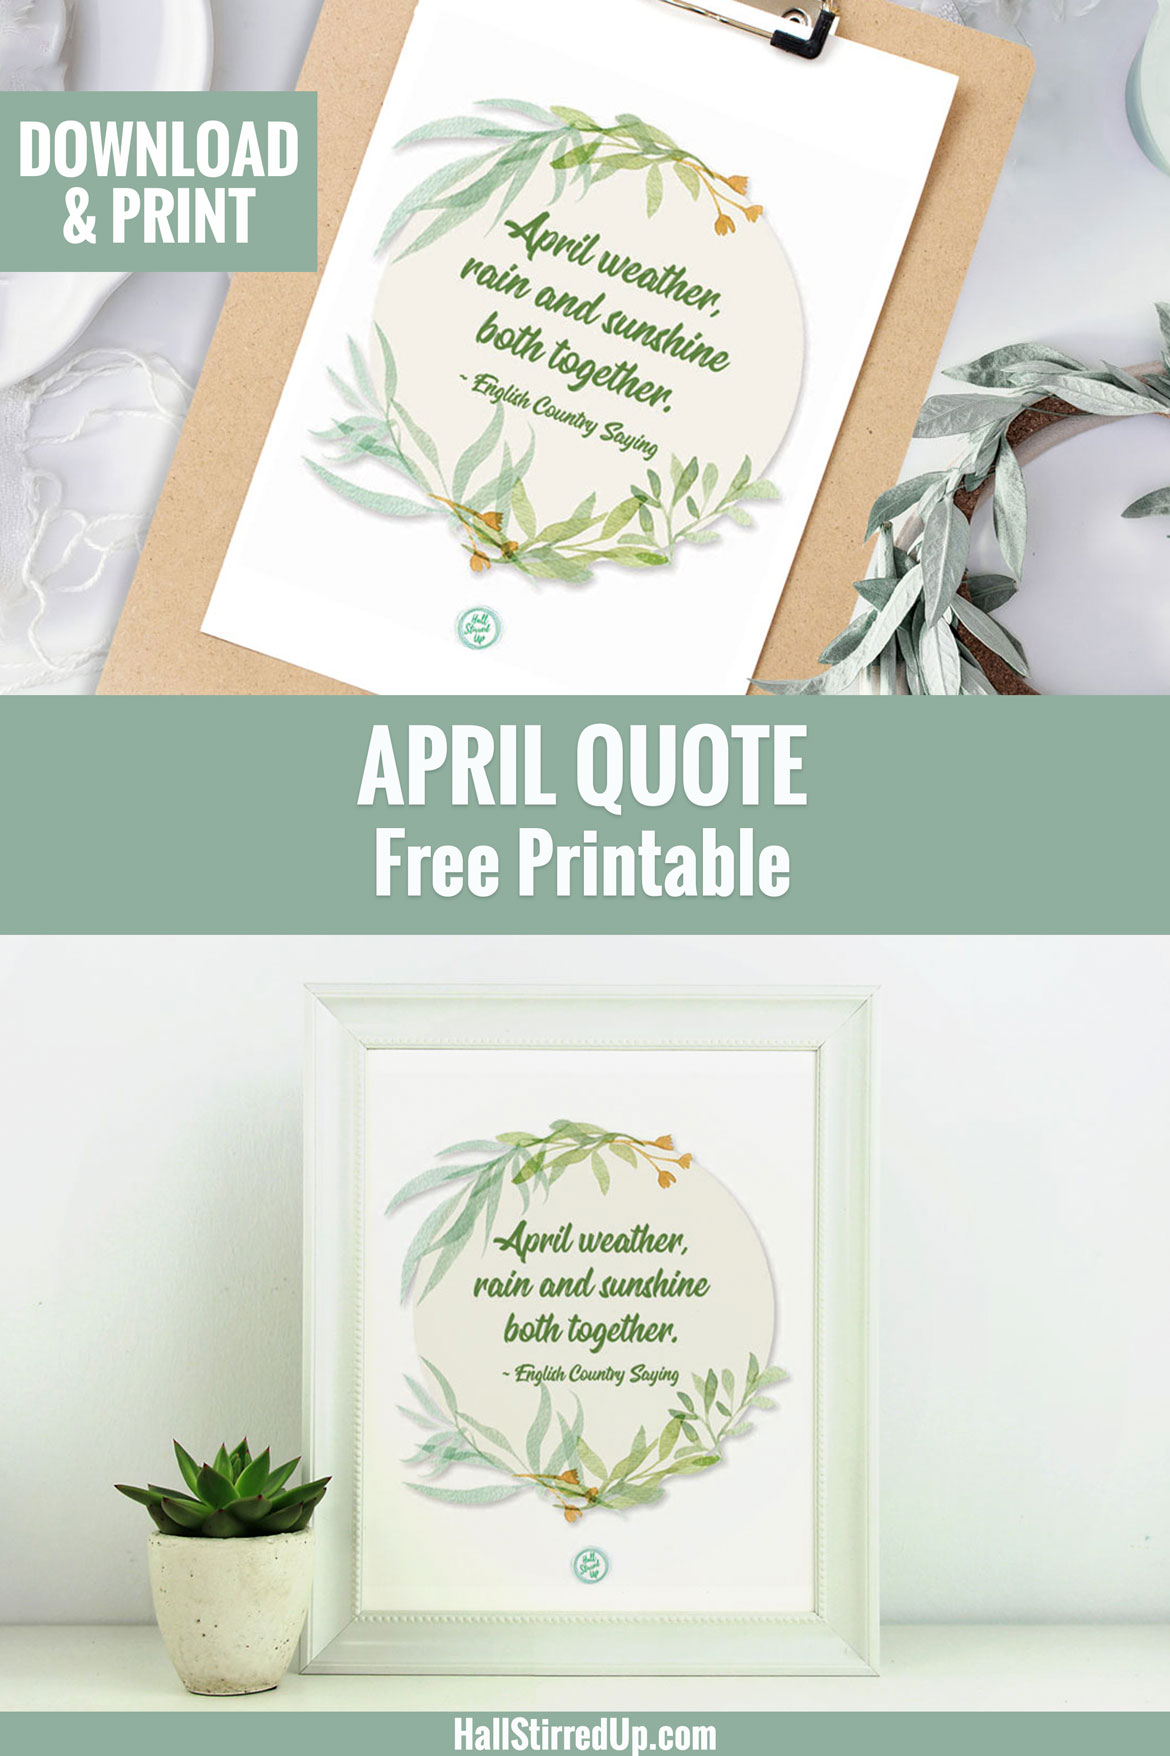 My favorite April quote and a fun new printable